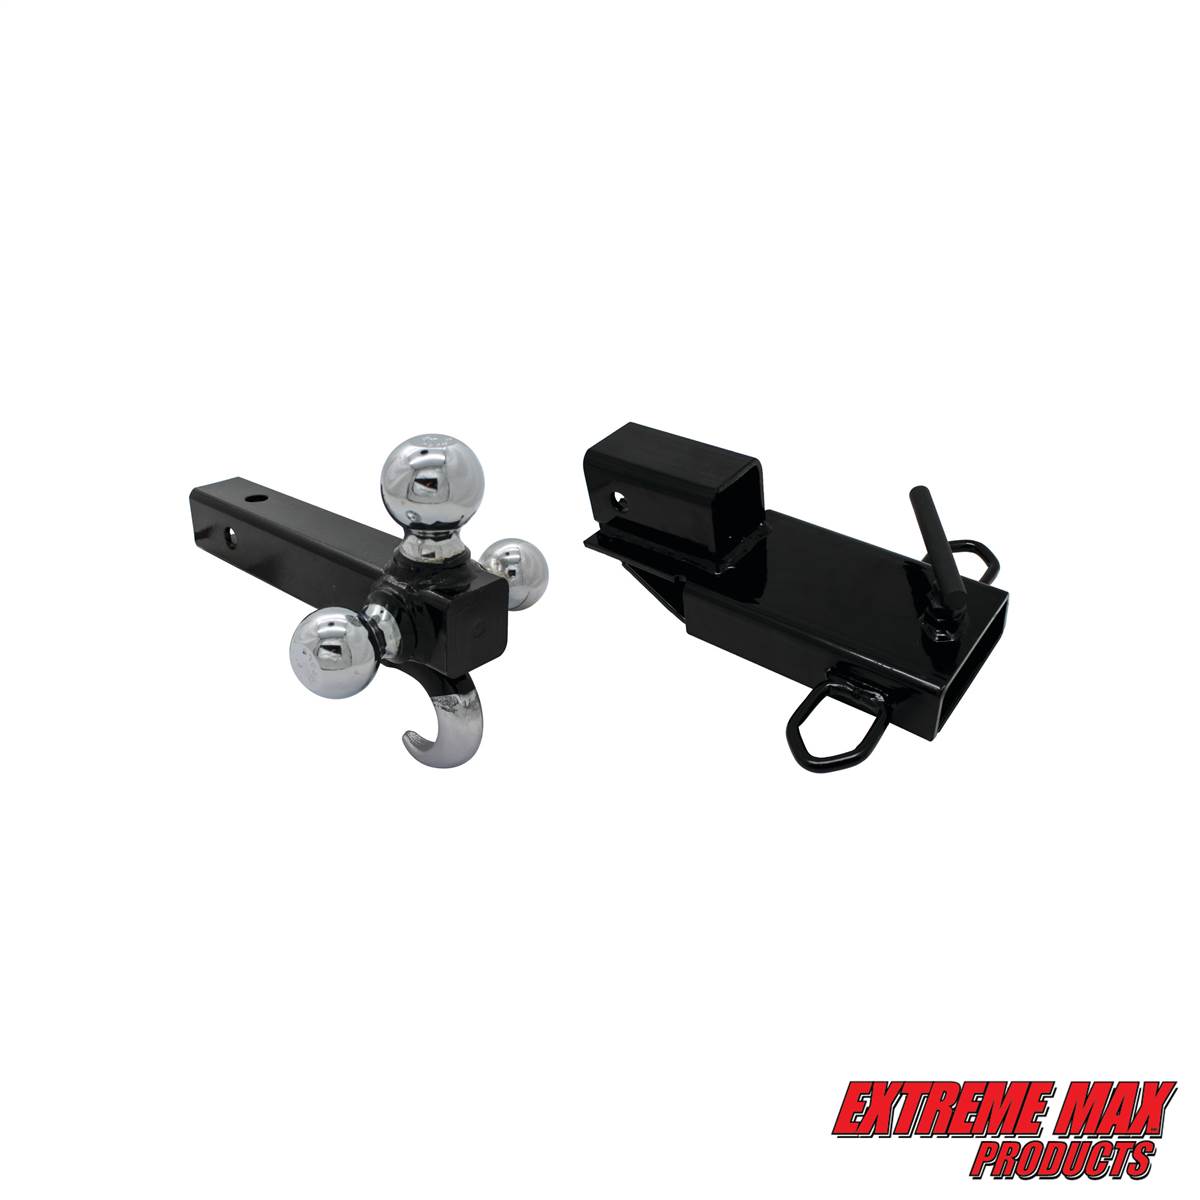 Extreme Max 5001.1389 Clamp-On Forklift Hitch 2 Receiver with Tri-Ball  Hitch and Tow Hook